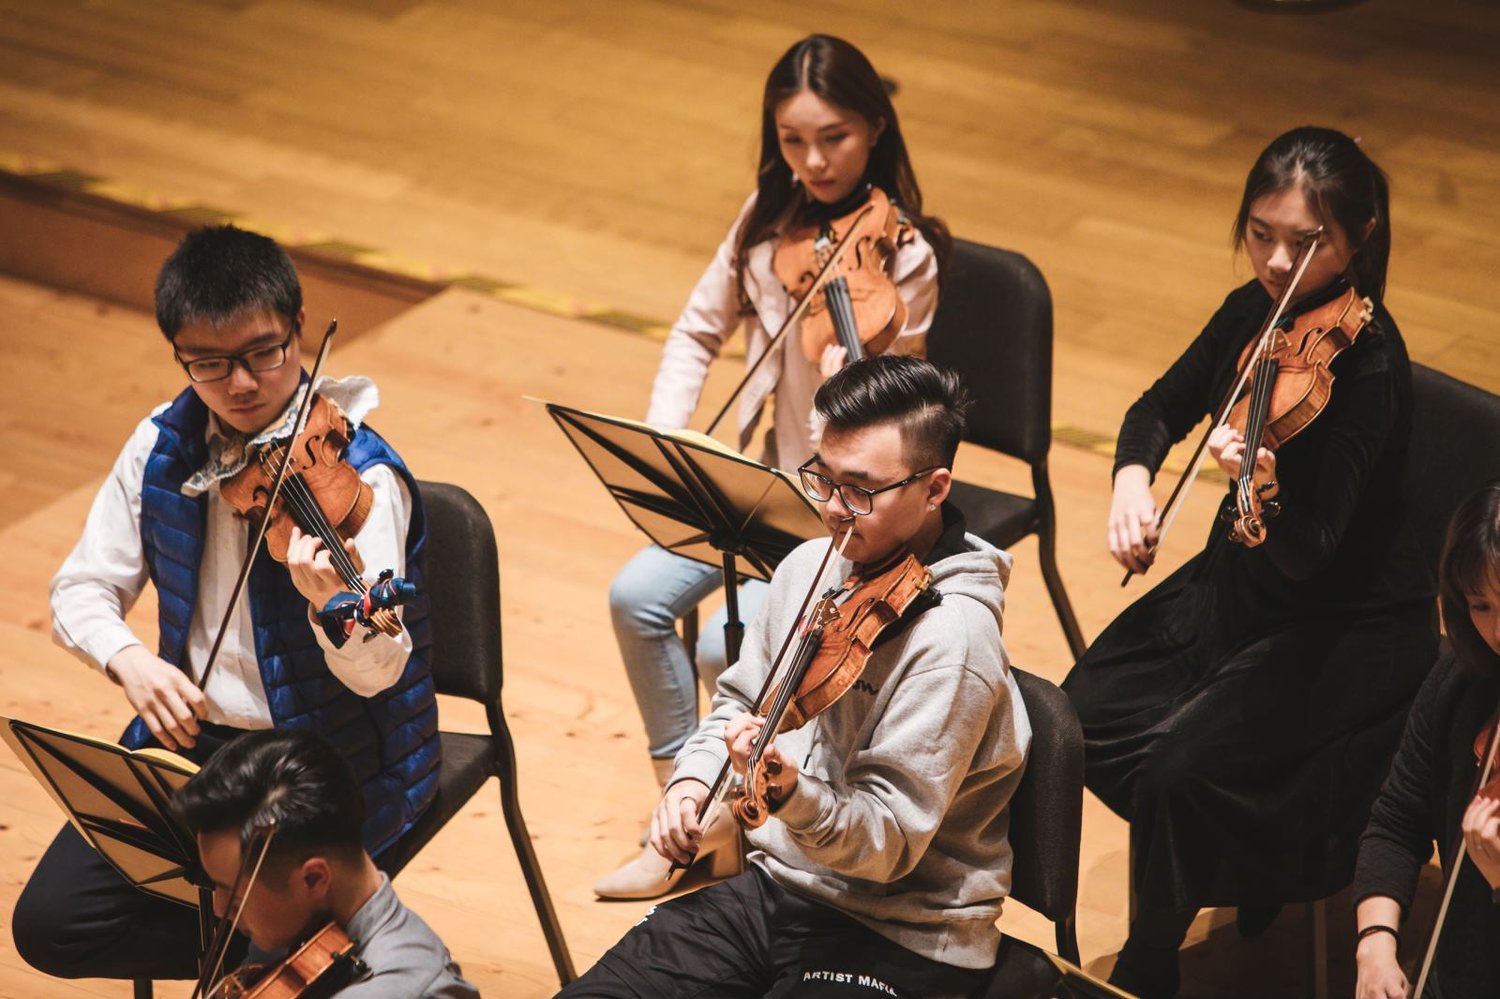 Seen in sequence: Benny (holding clarinet), Qiu Sheng, Yi-Ting and Xian Long (frontmost) in rehearsal.